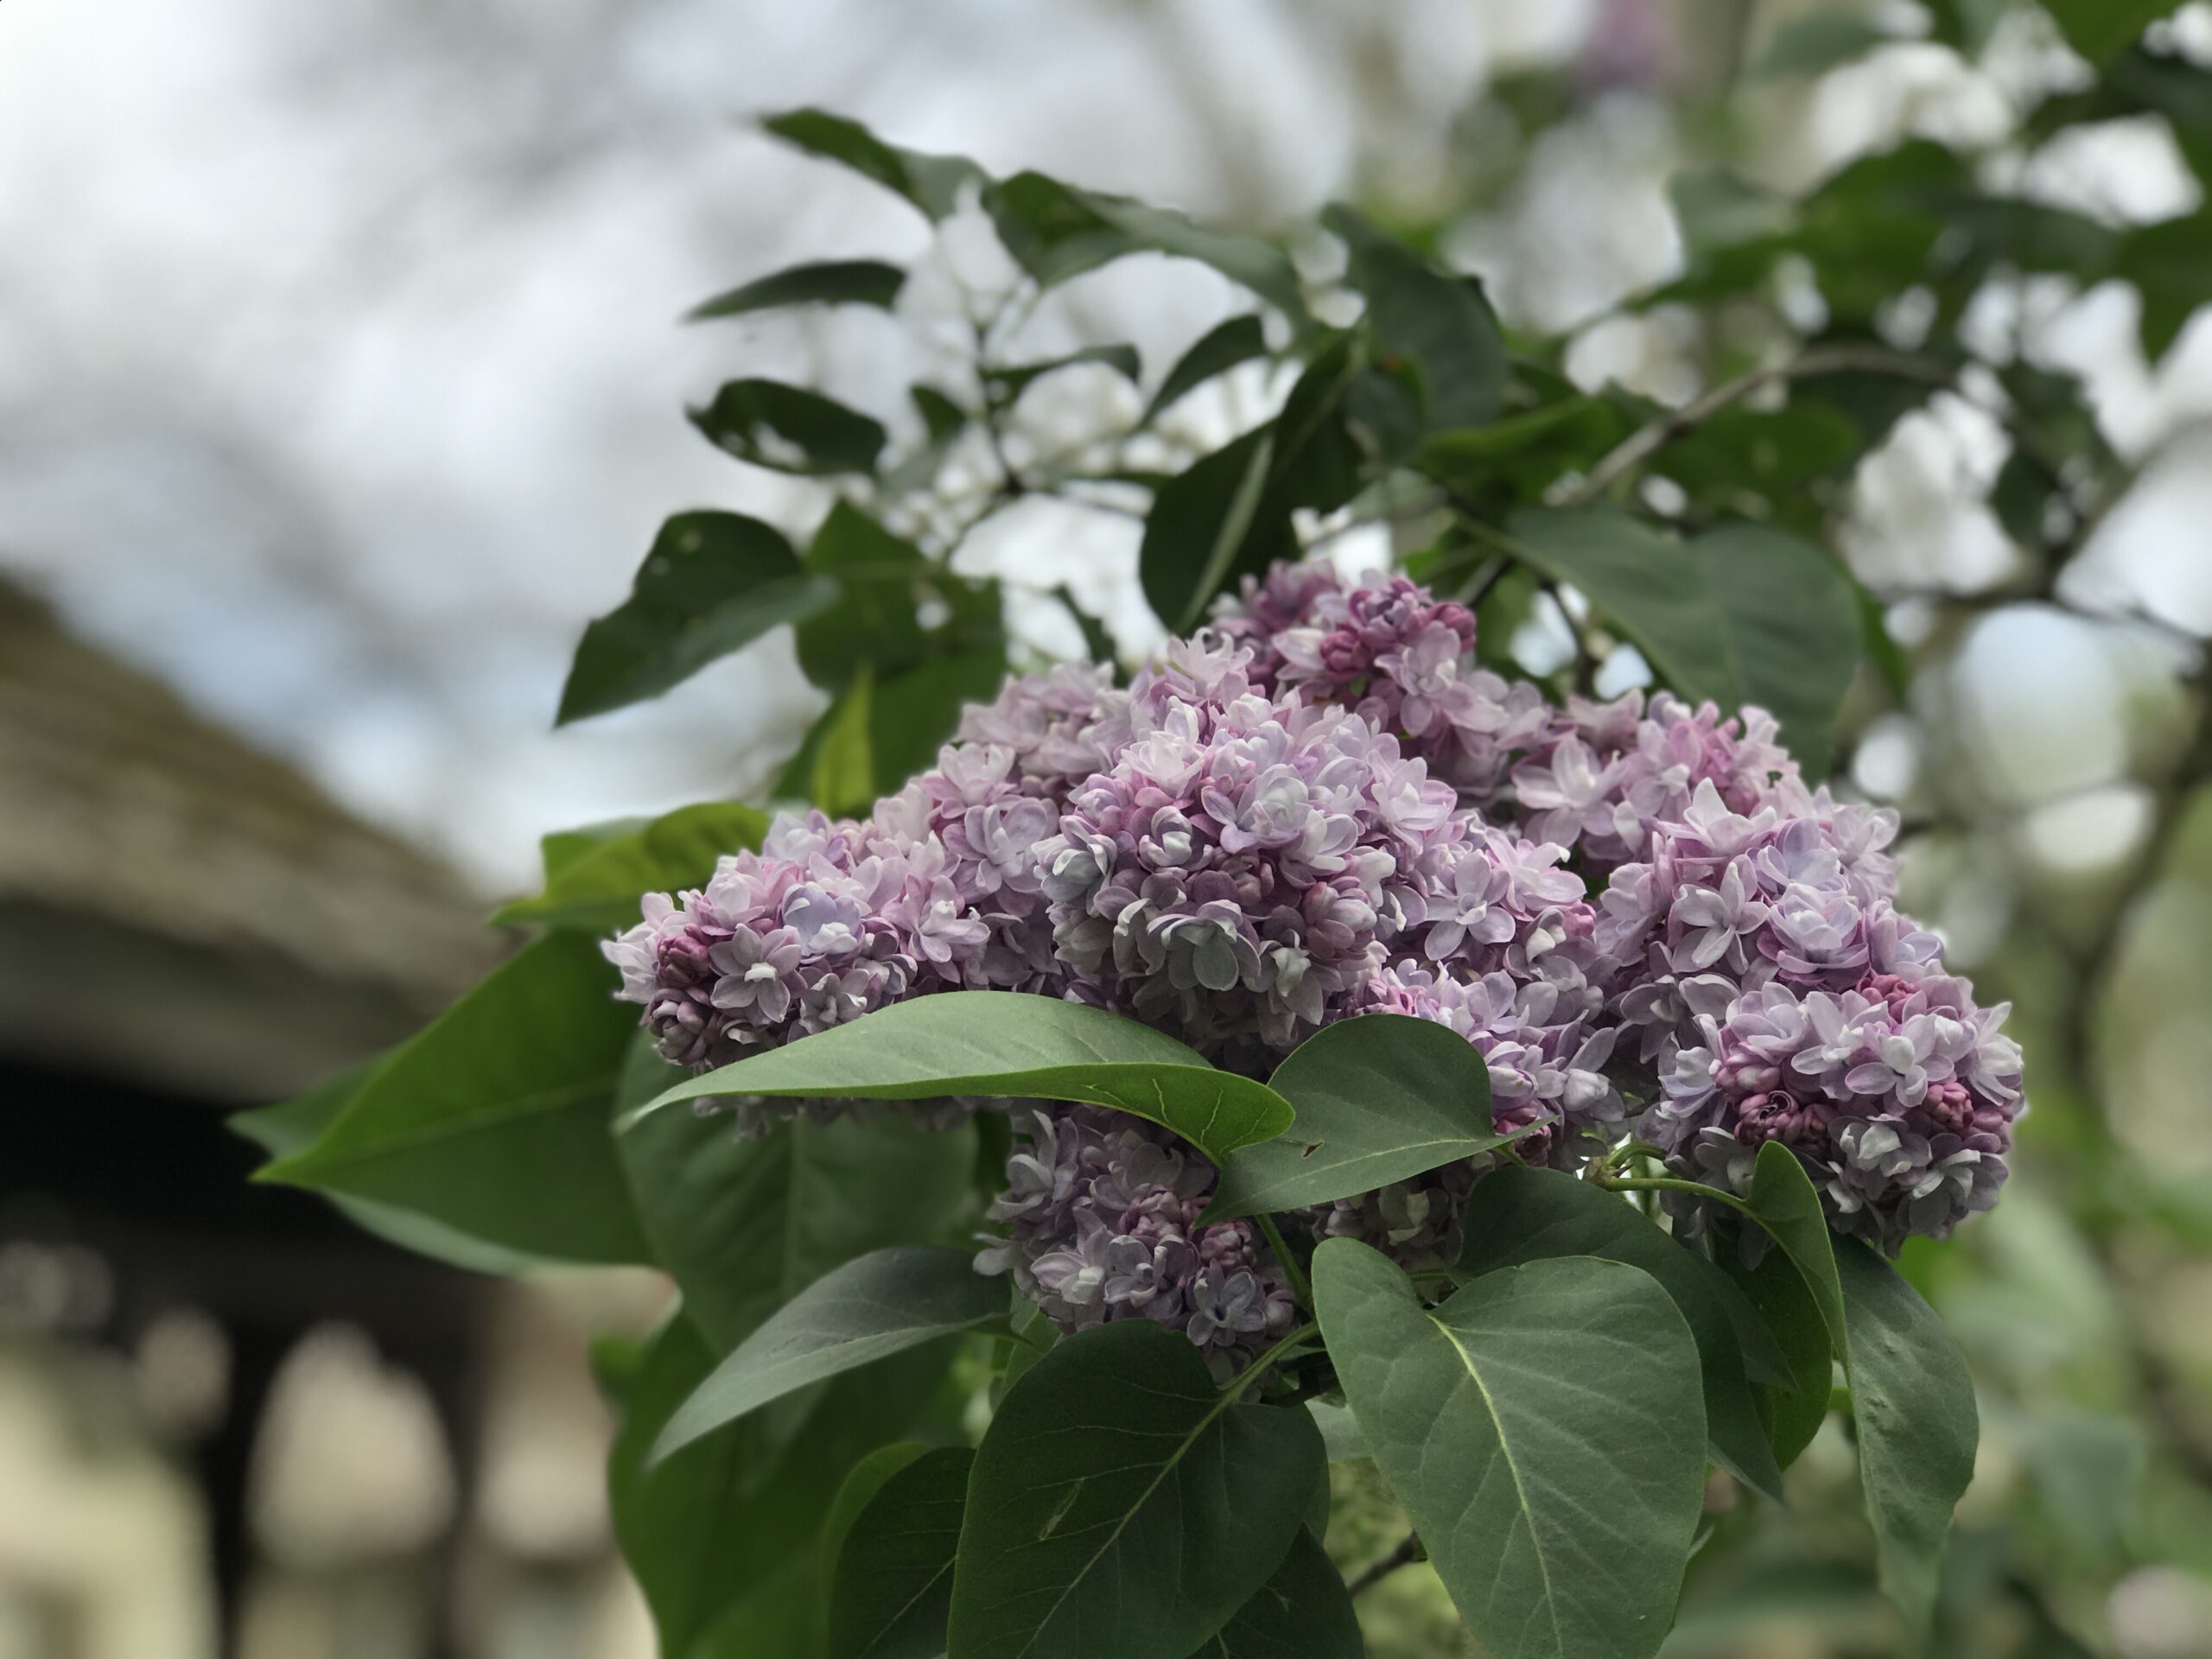 #2 Laura’s Lilac Bower